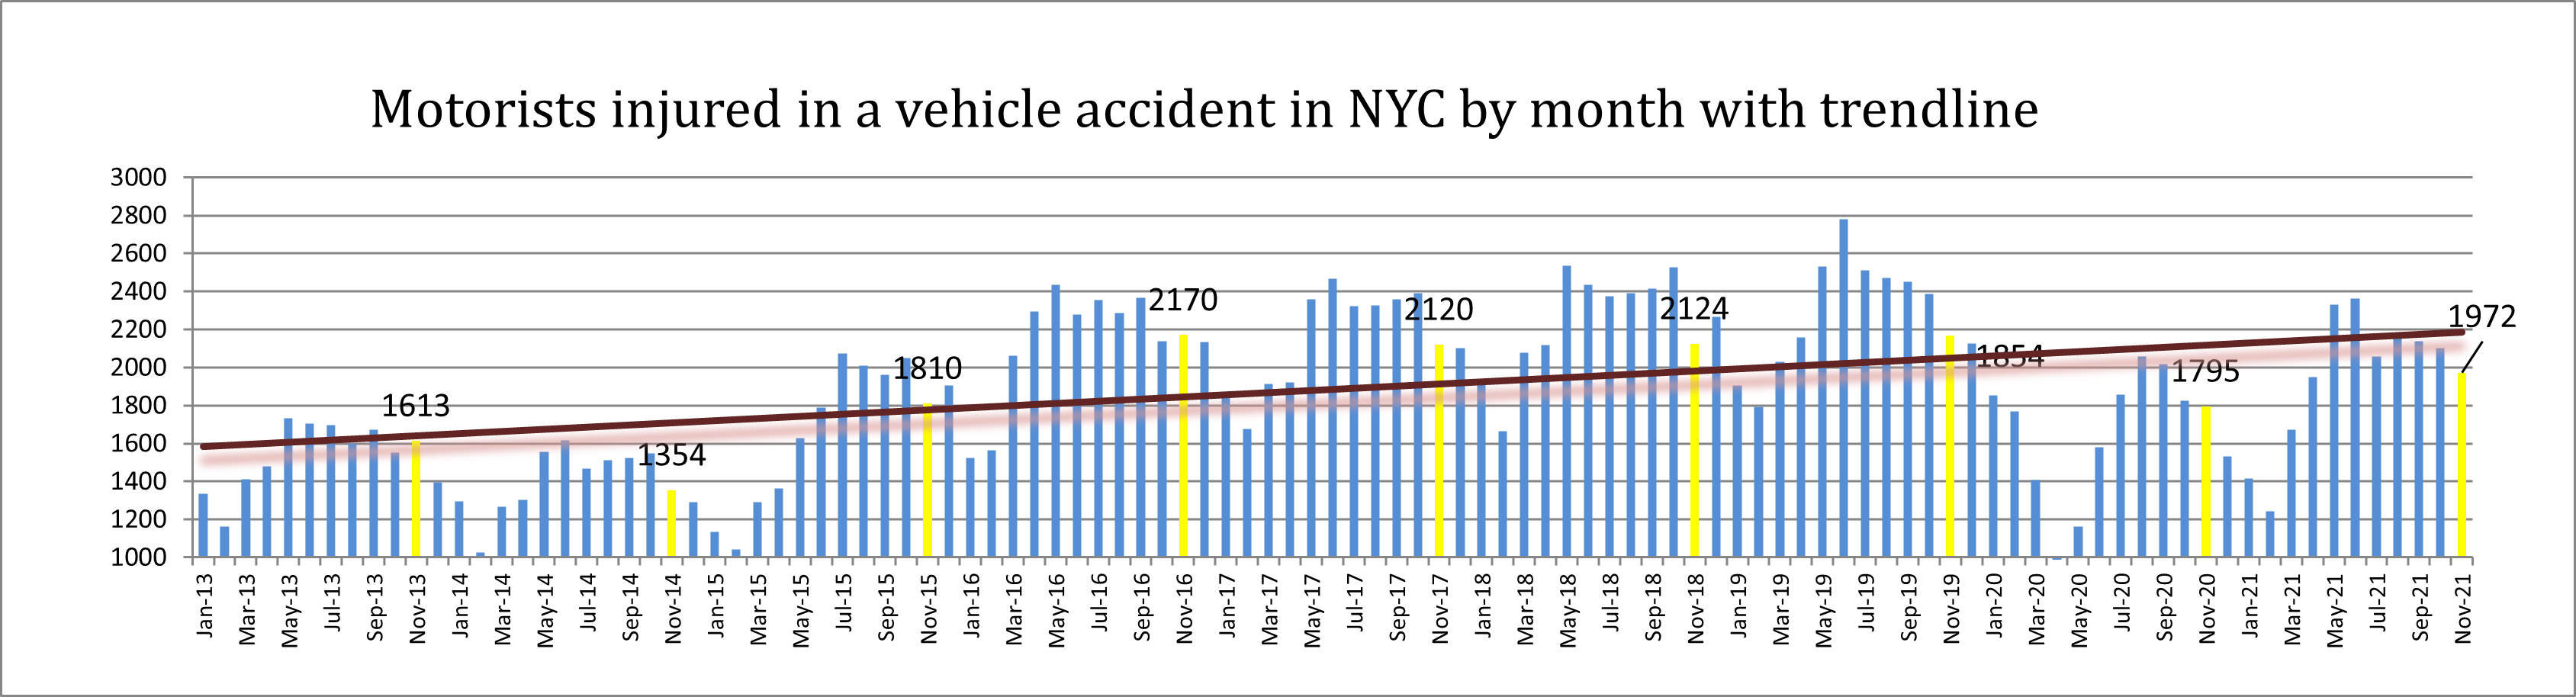 motorists injured in car accidents NYC November 2021